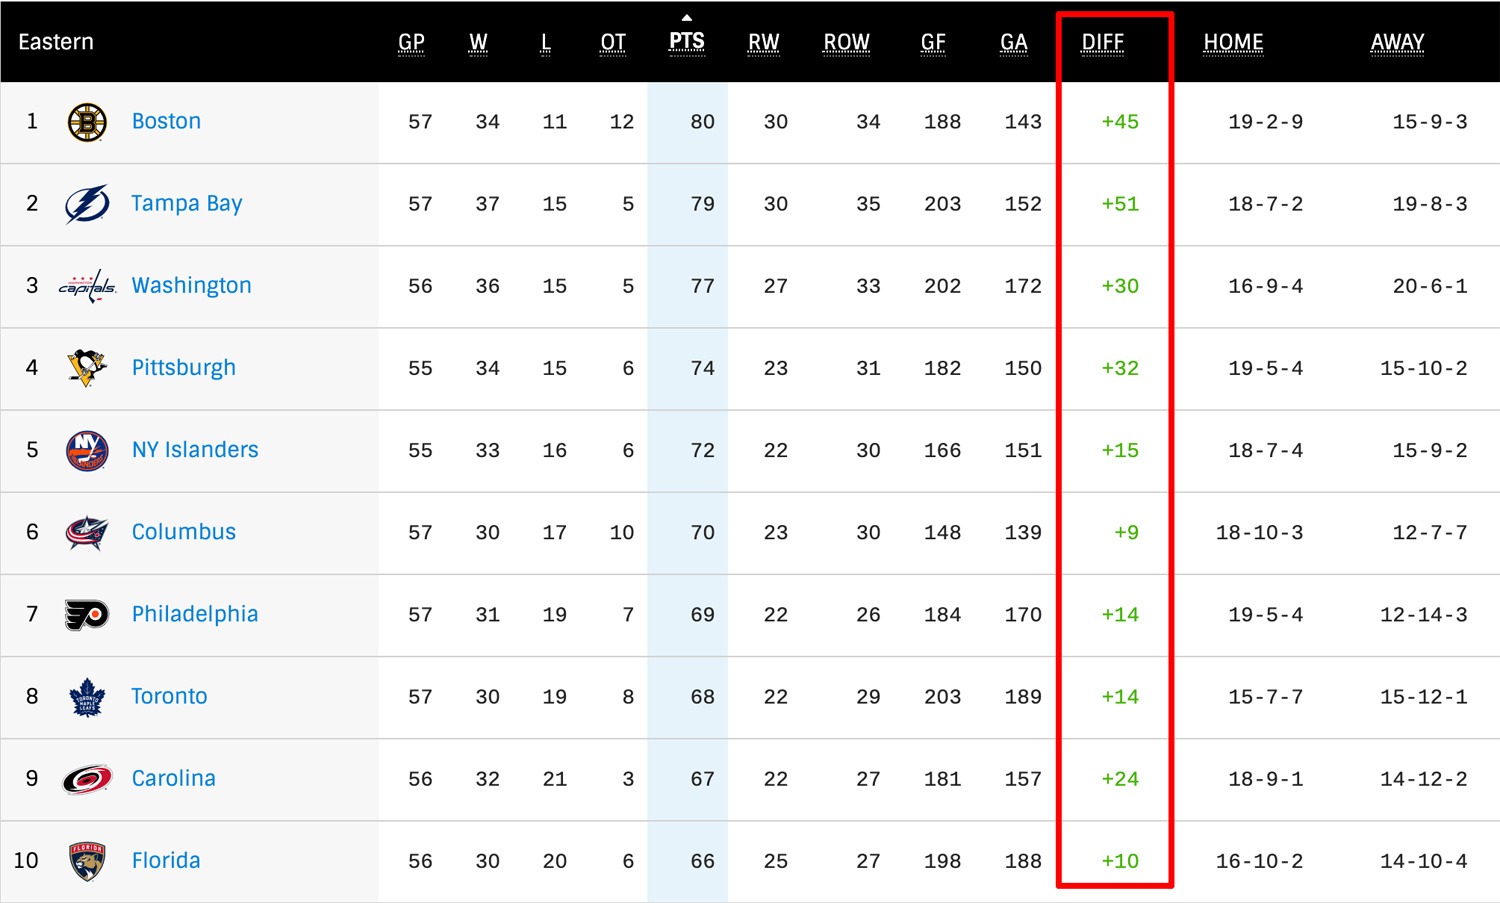 What Does DIFF Mean in Hockey Standings?